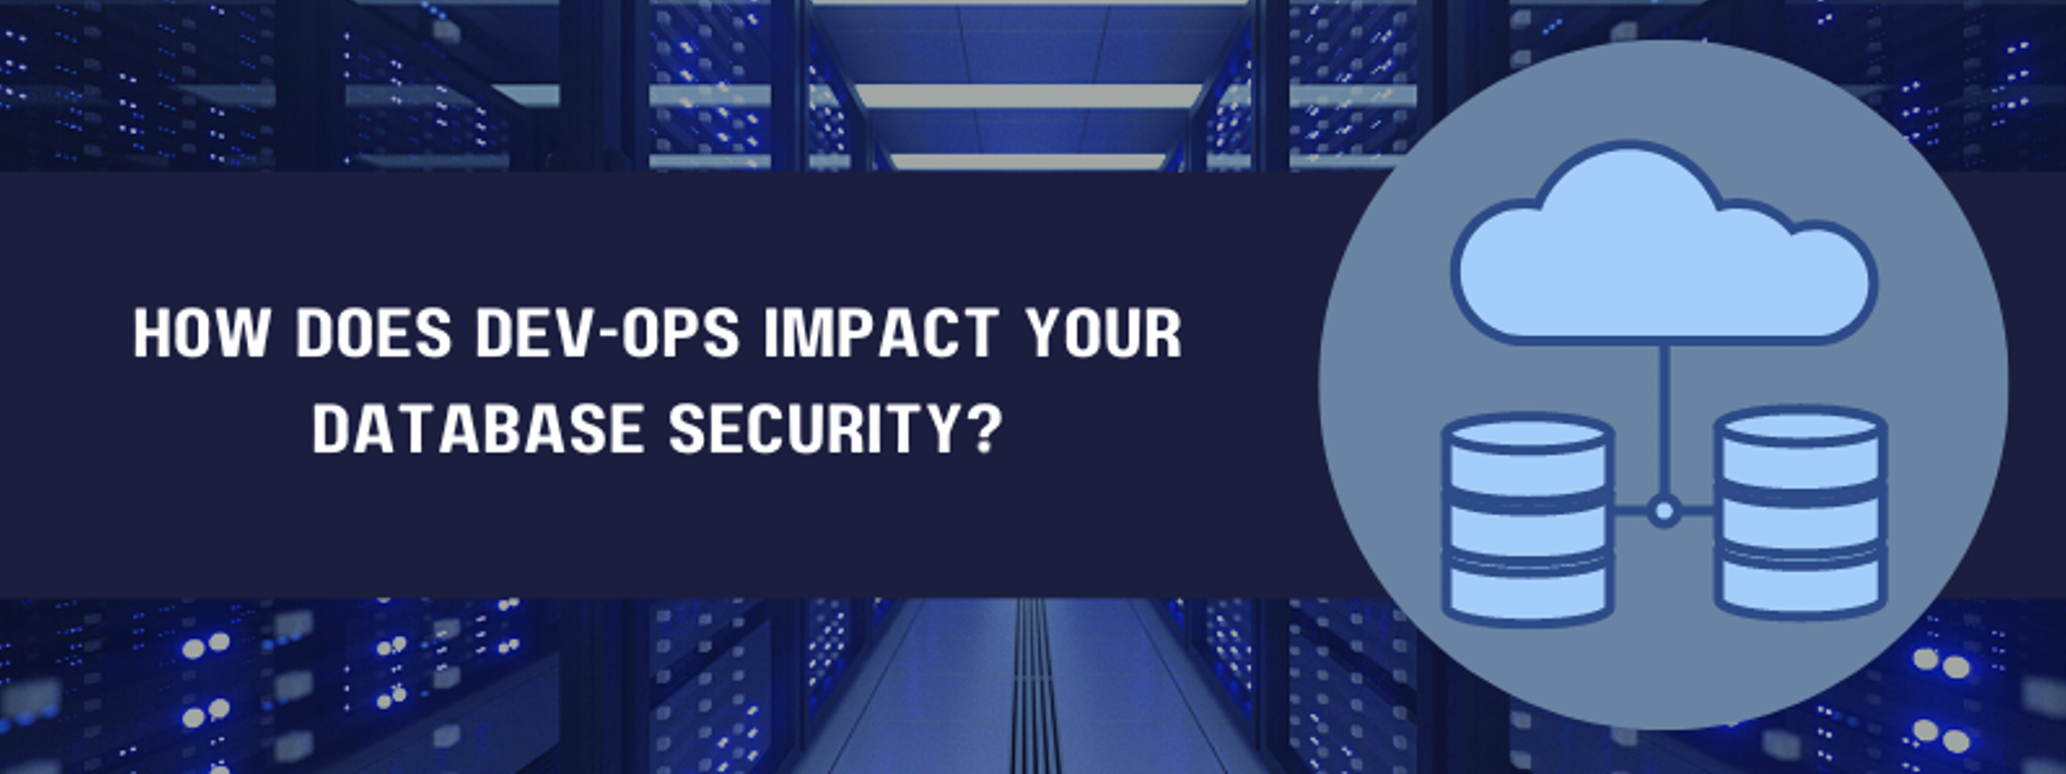 How Does DevOps Impact Your Database Security?